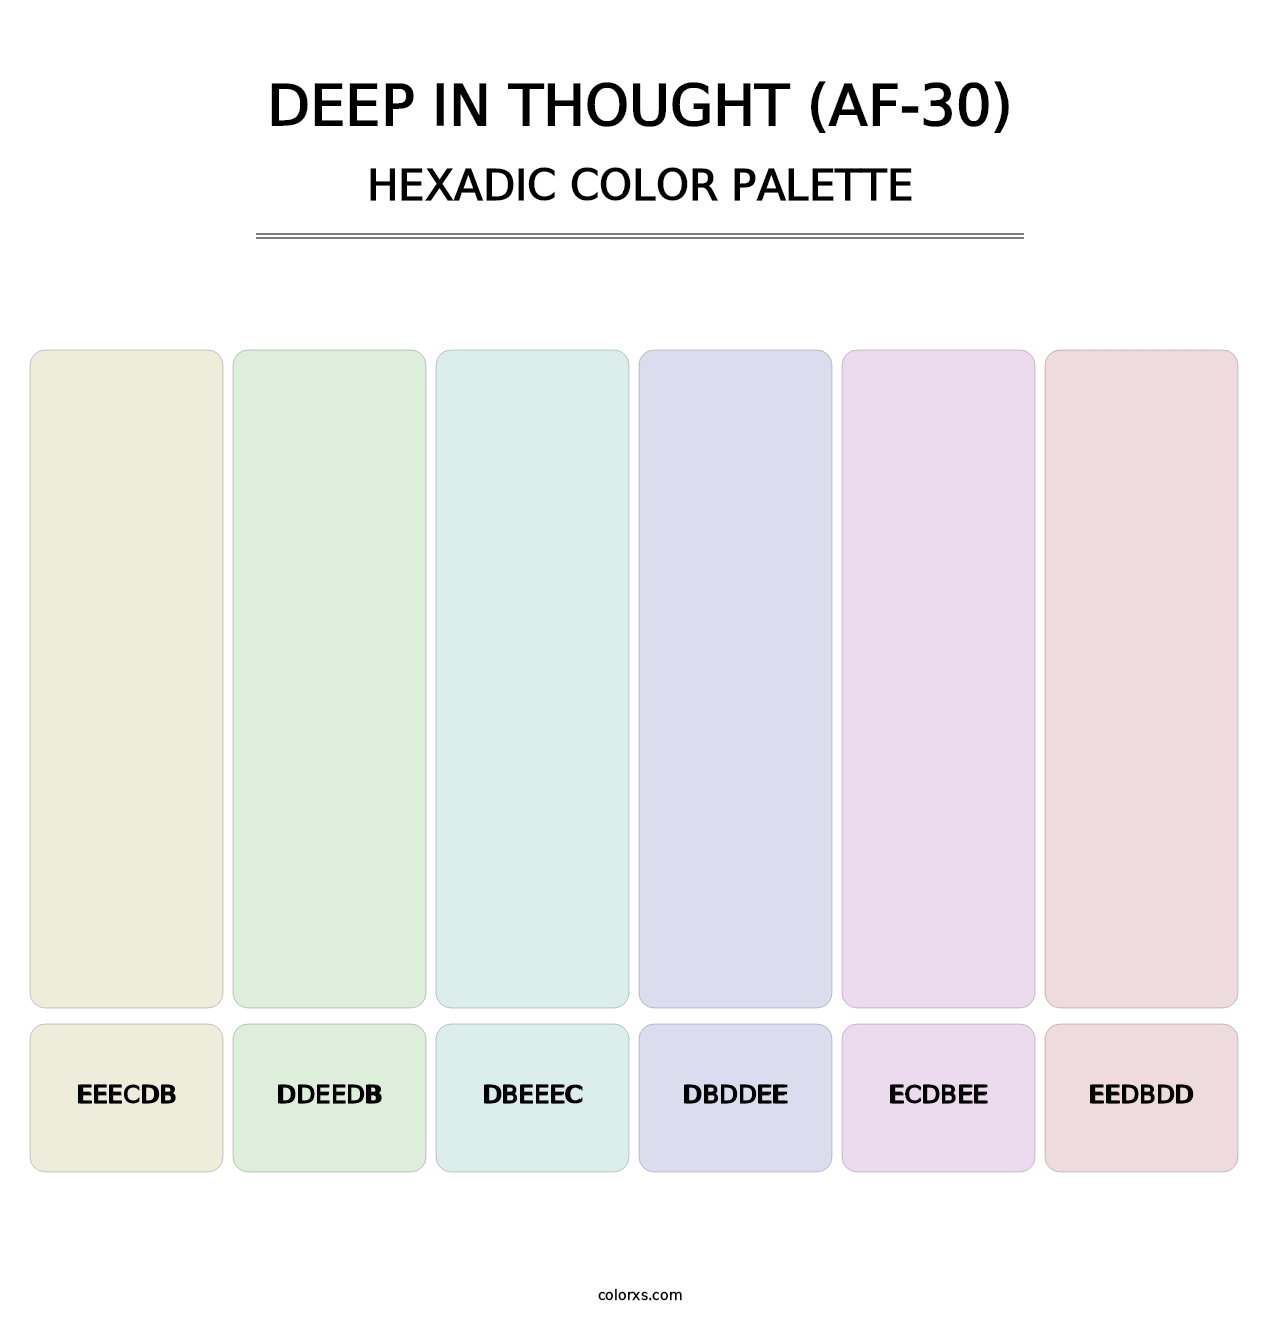 Deep in Thought (AF-30) - Hexadic Color Palette